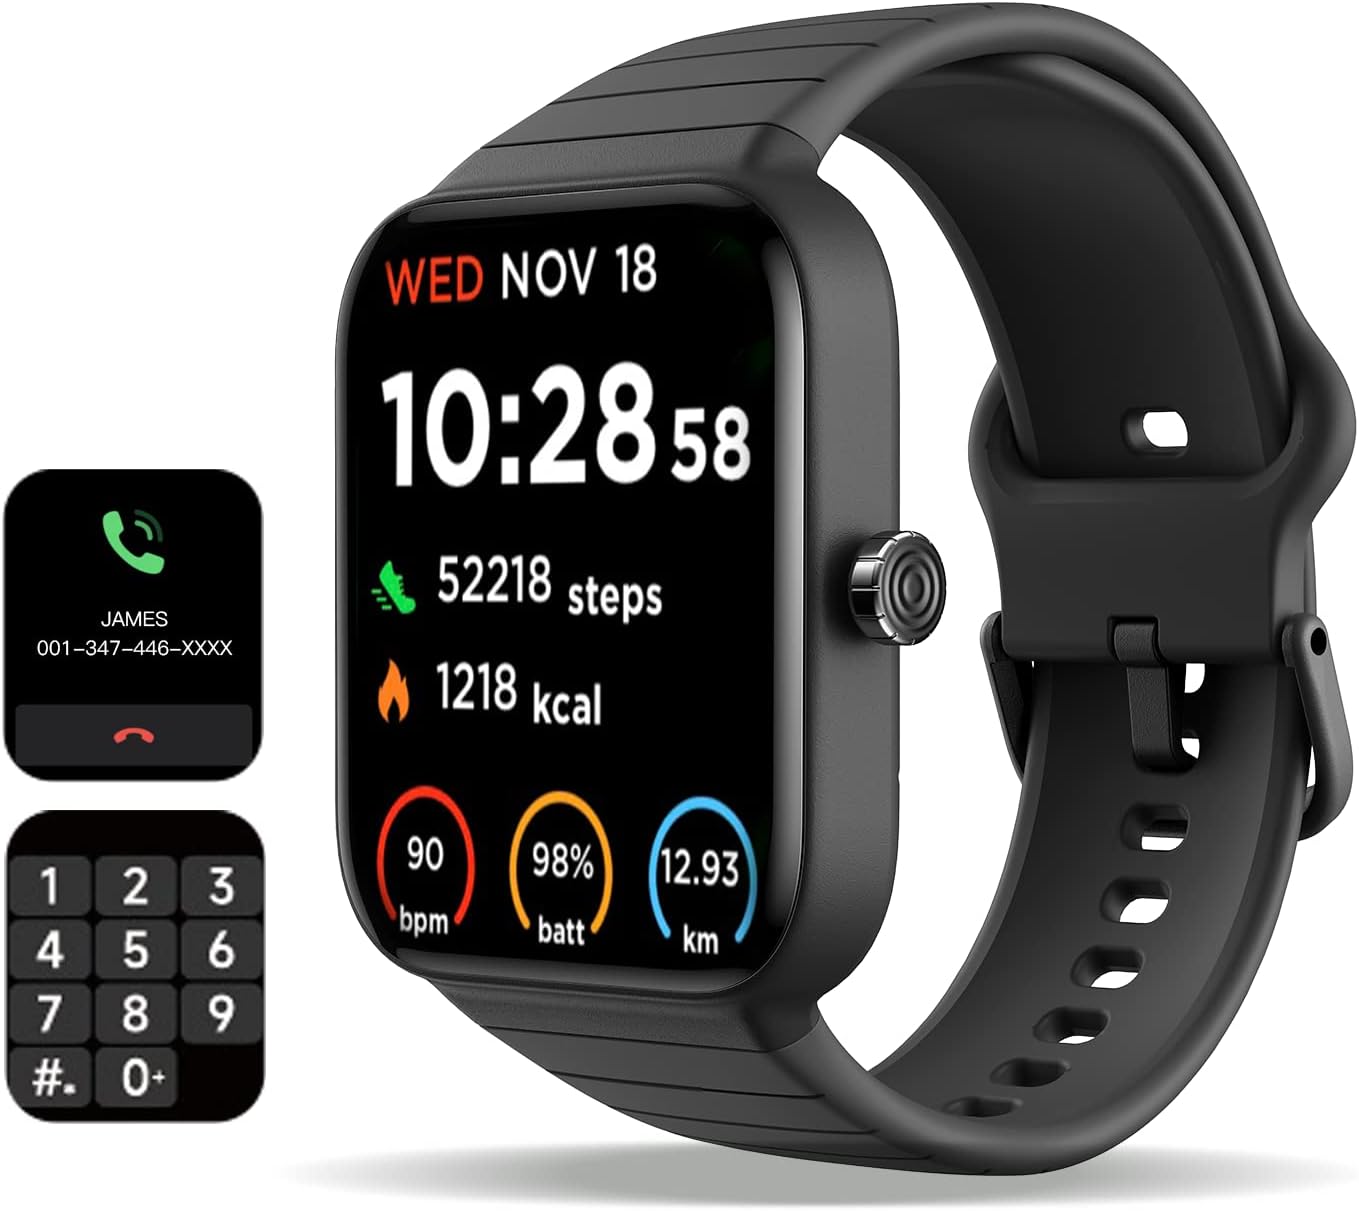 Vibeat Fitness Tracker Review: Affordable and Feature-Rich Smartwatch for Health Monitoring